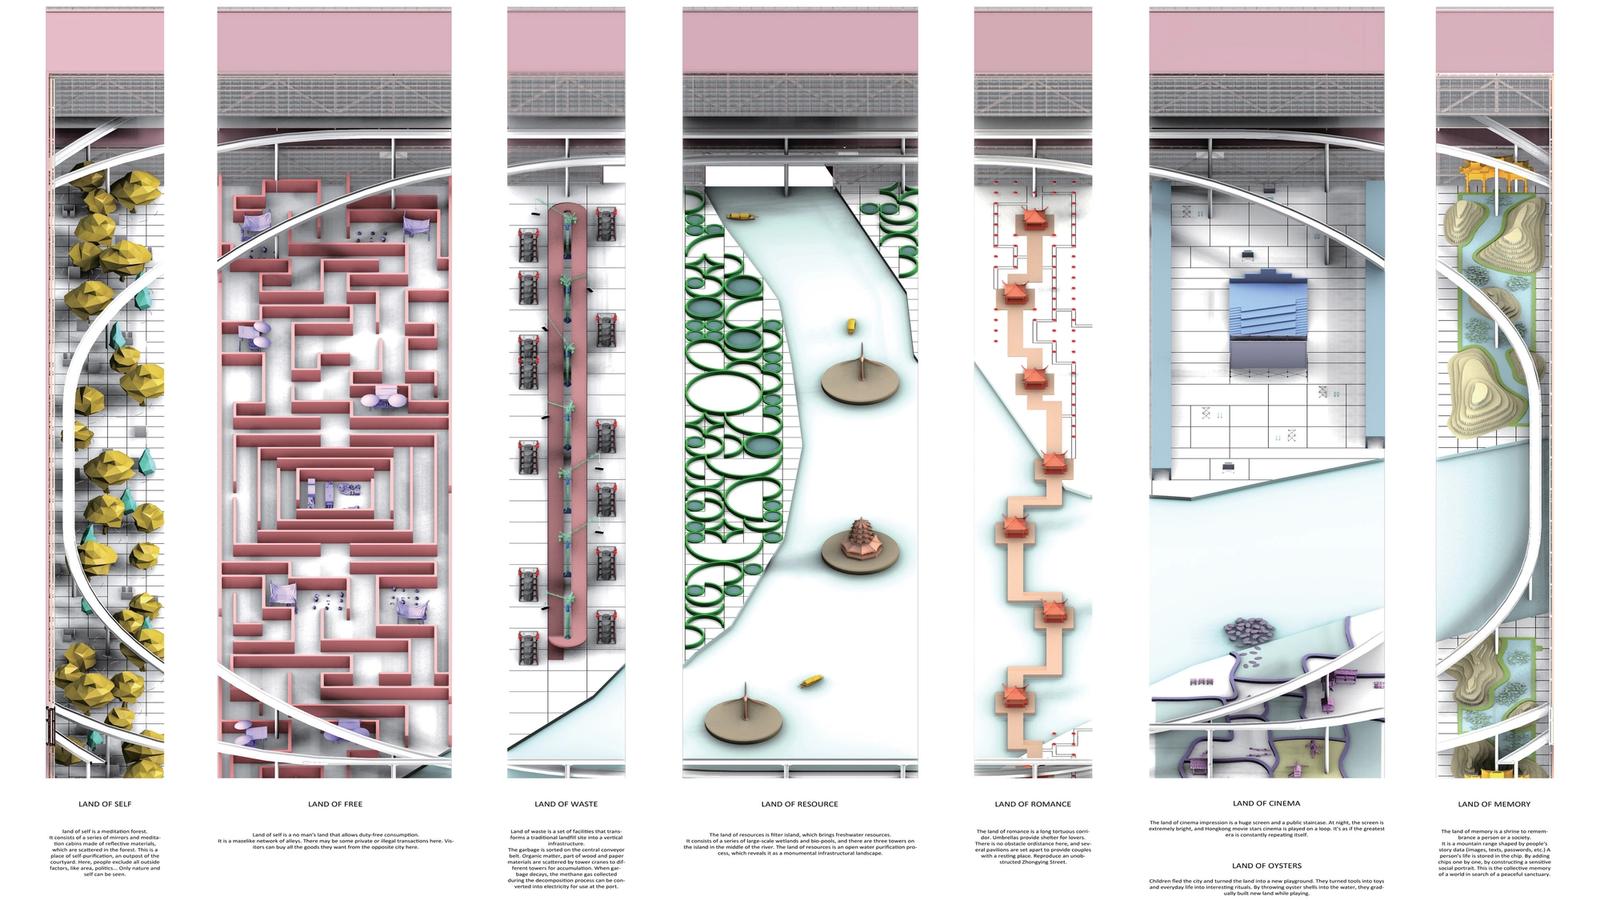 Boundary Connector - Future Port For Transforming the Defined Border Line between Hong Kong and Mainland China - Conceptual Courtyards - The Worlds of the Boundary